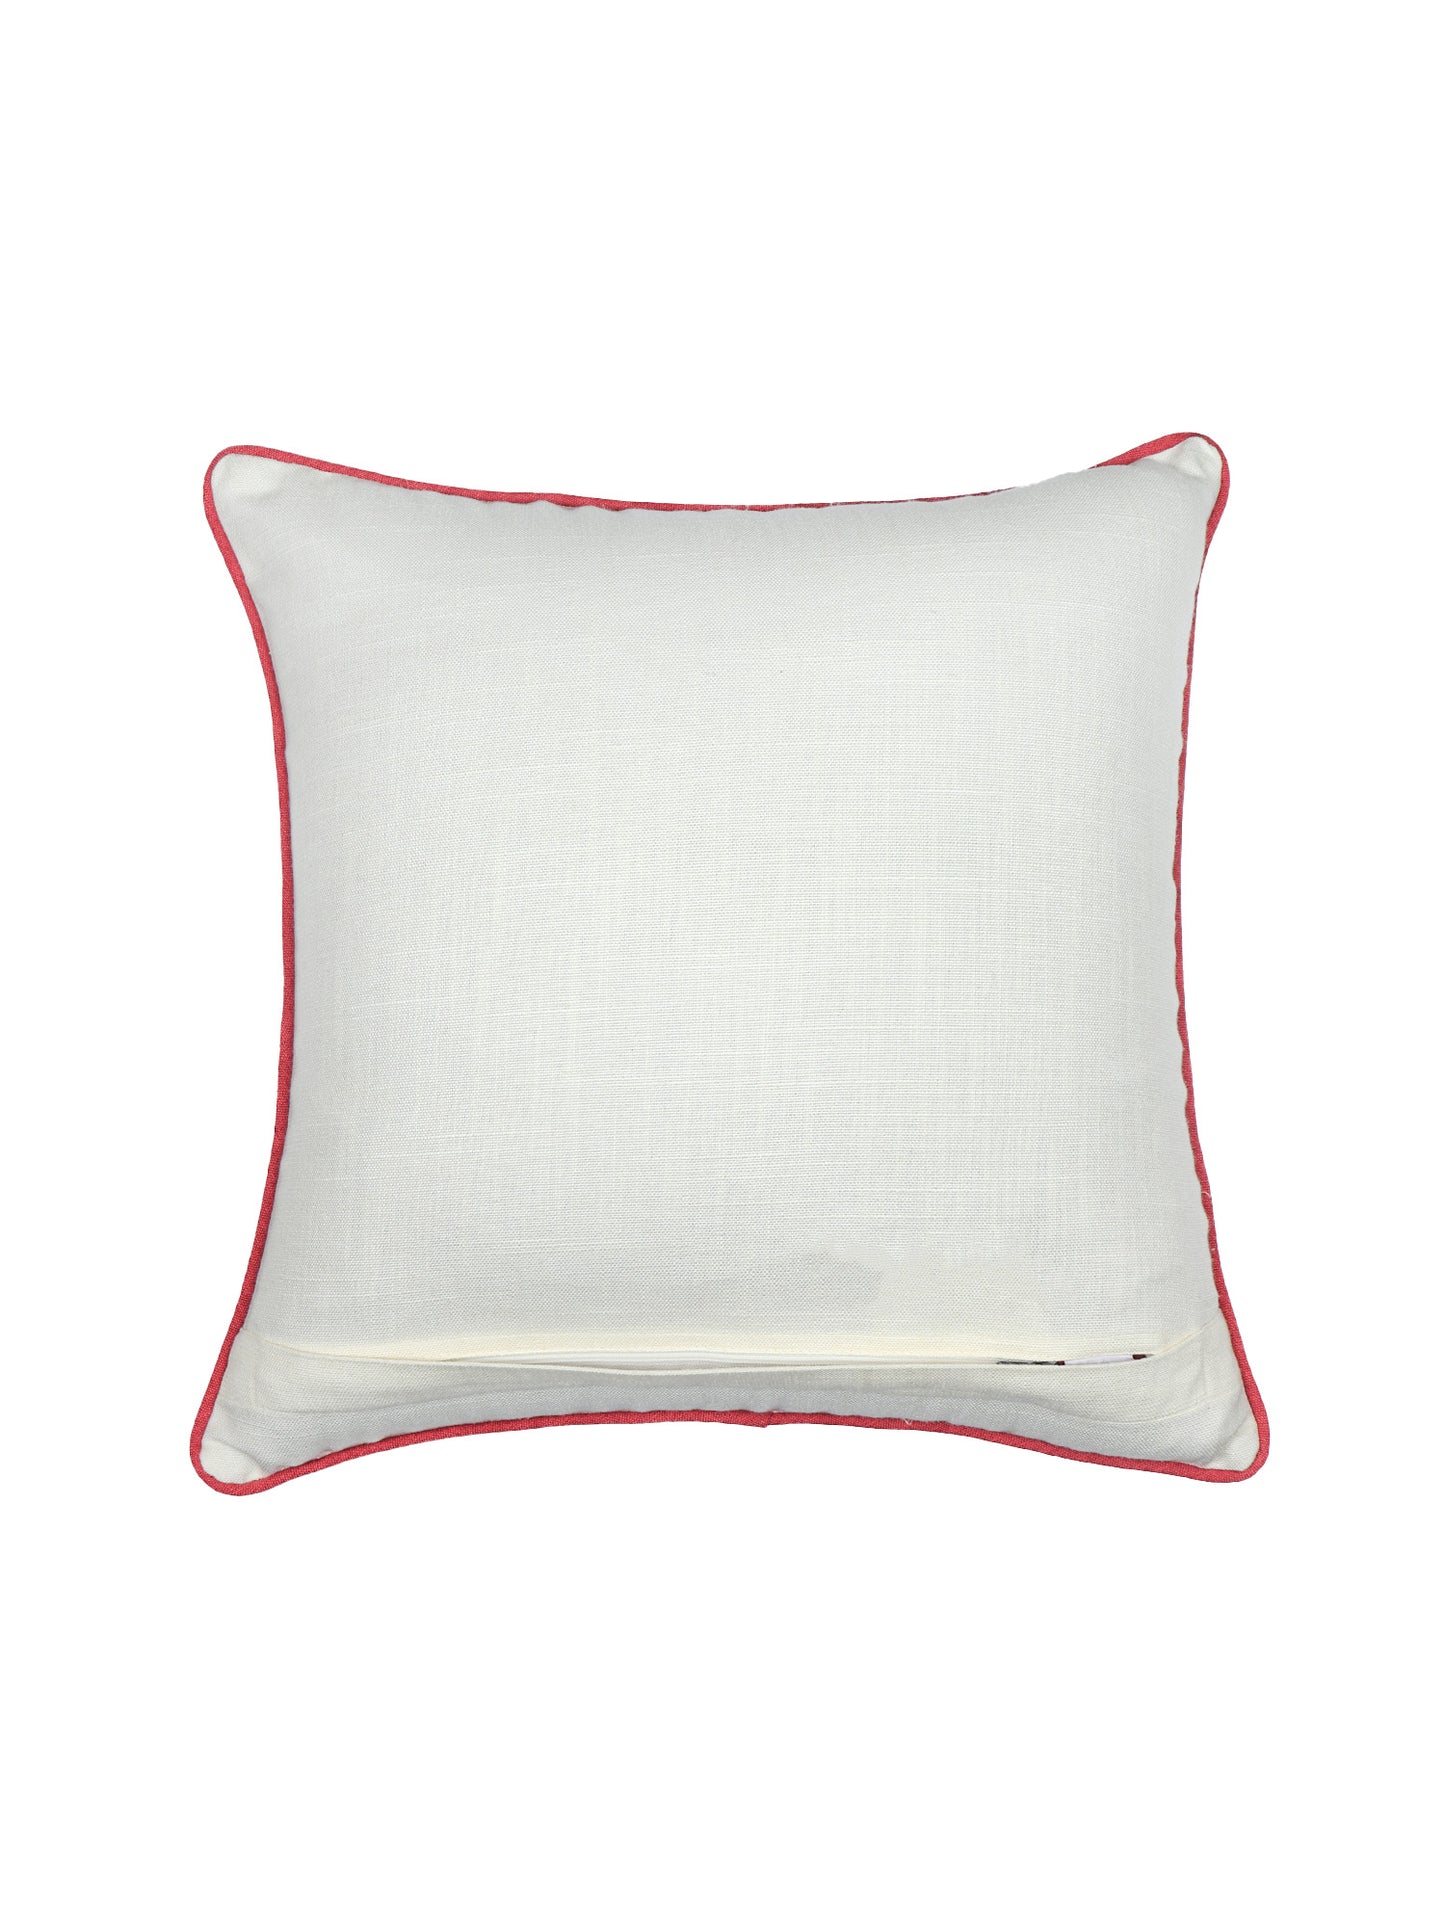 Cushion Cover with Hand Embroidery on Mughal Garden Print with Cord Piping - Cotton Blend | White - 16x16in